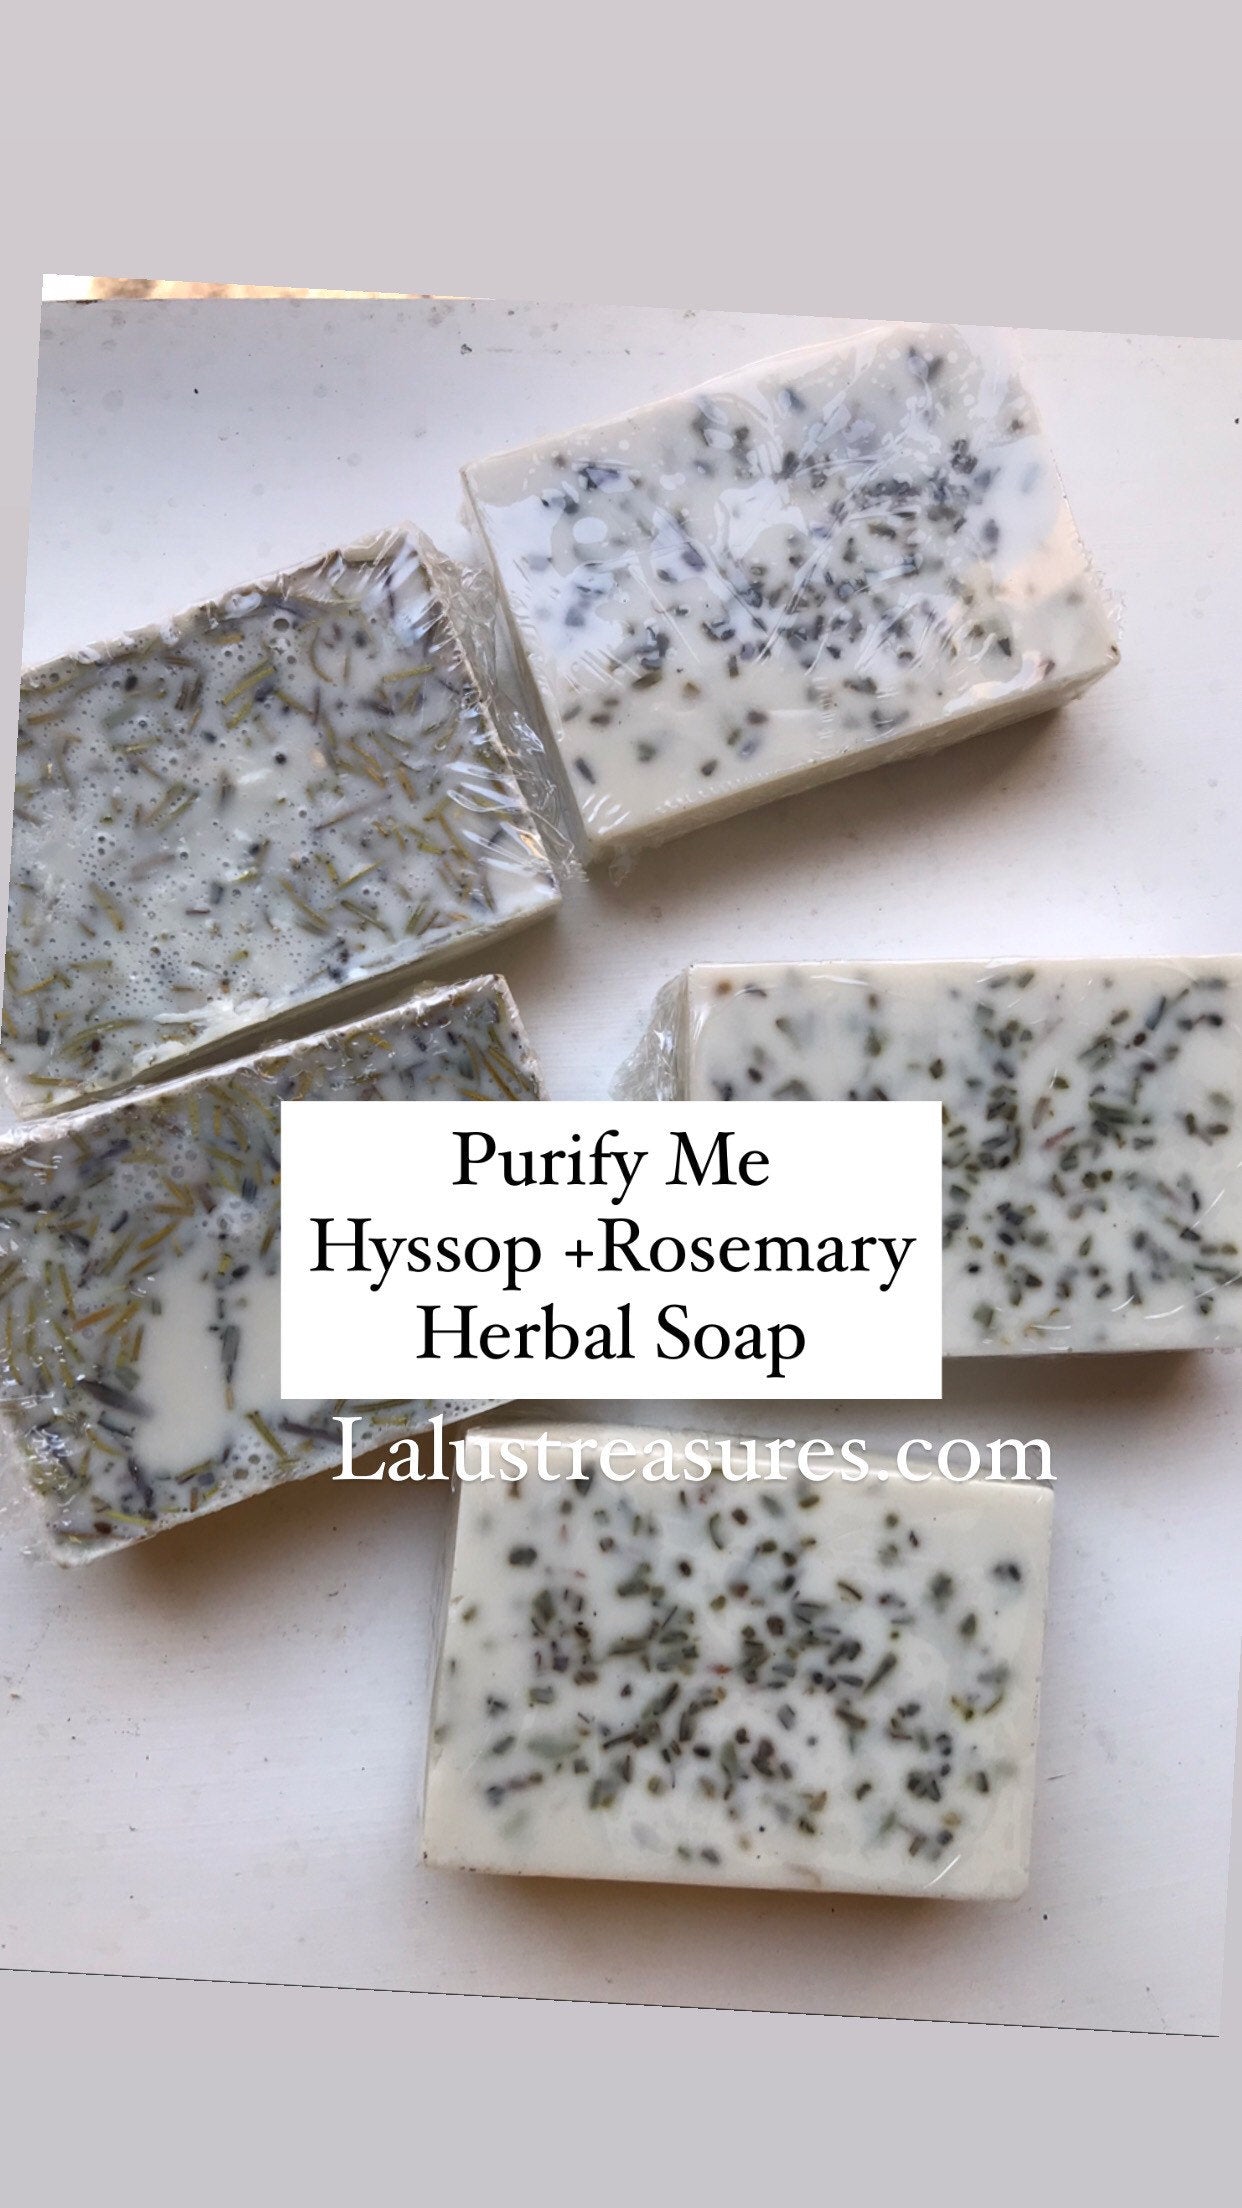 Holy Hyssop & Rosemary Spiritual Cleansing Soap, Remove Hexes, Hoodoo, Jinxes, Santeria